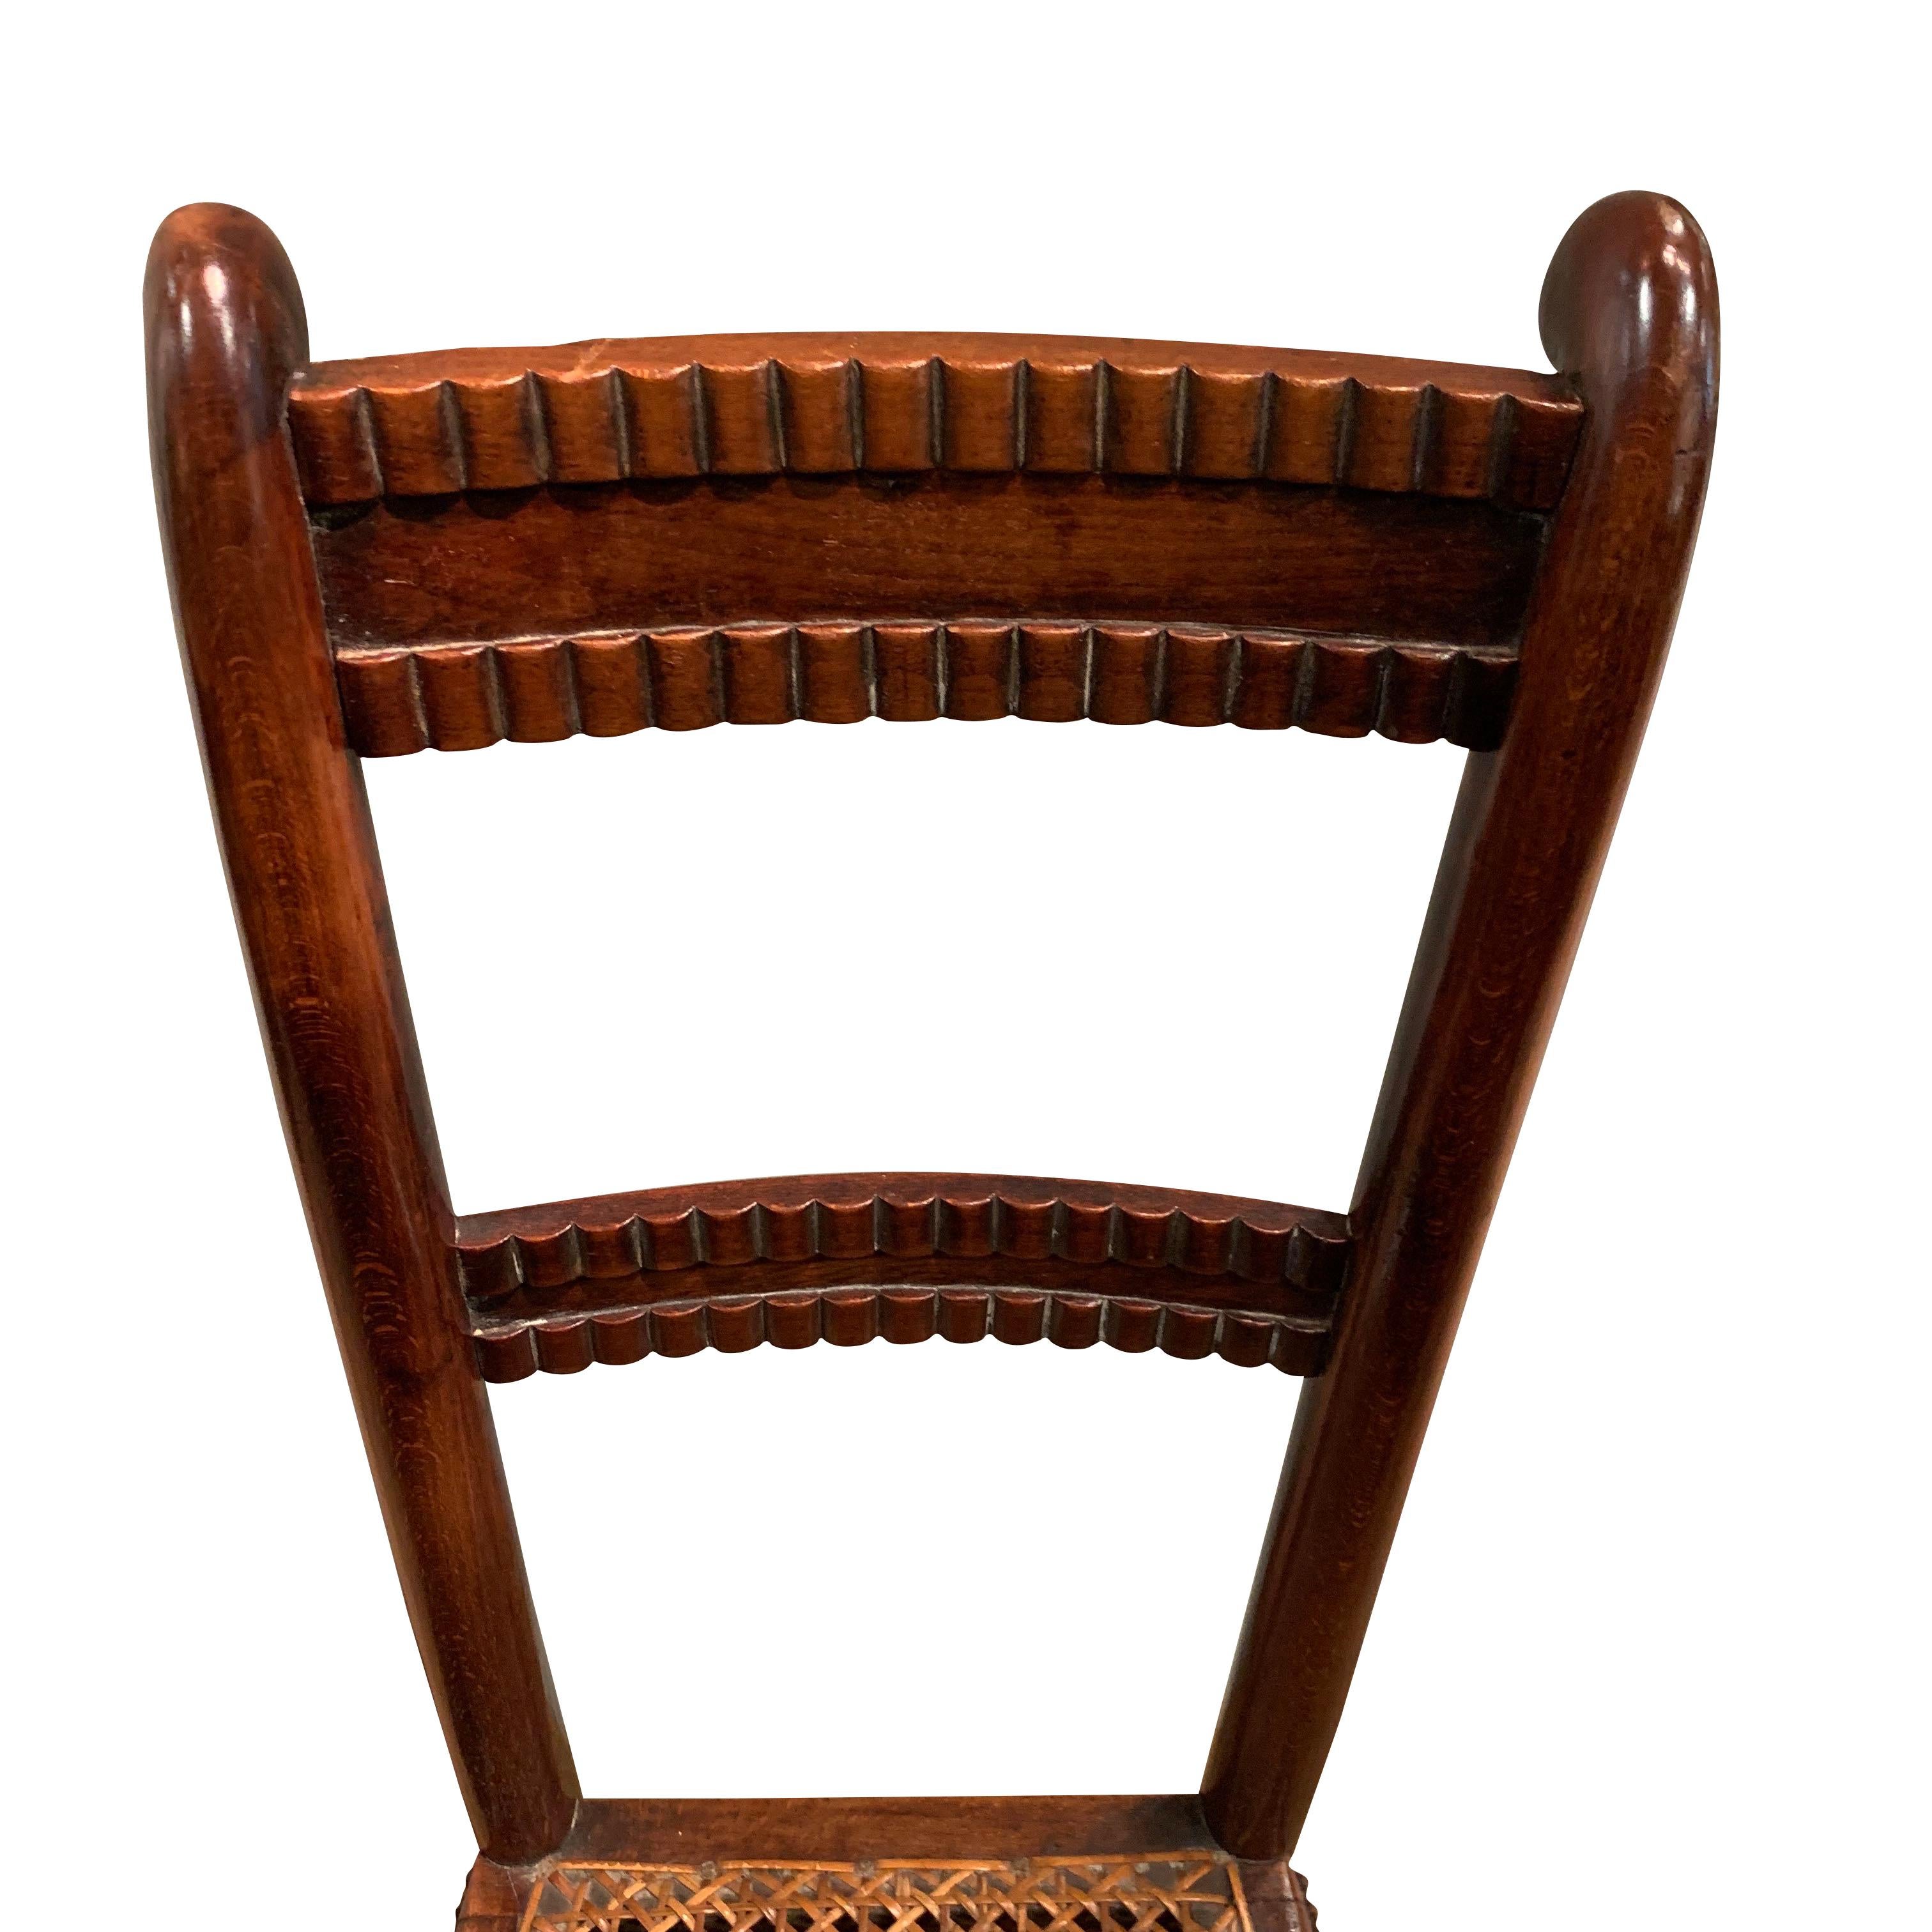 19th century English childs deportment chair
Used to teach young children good posture
Made of beechwood

 